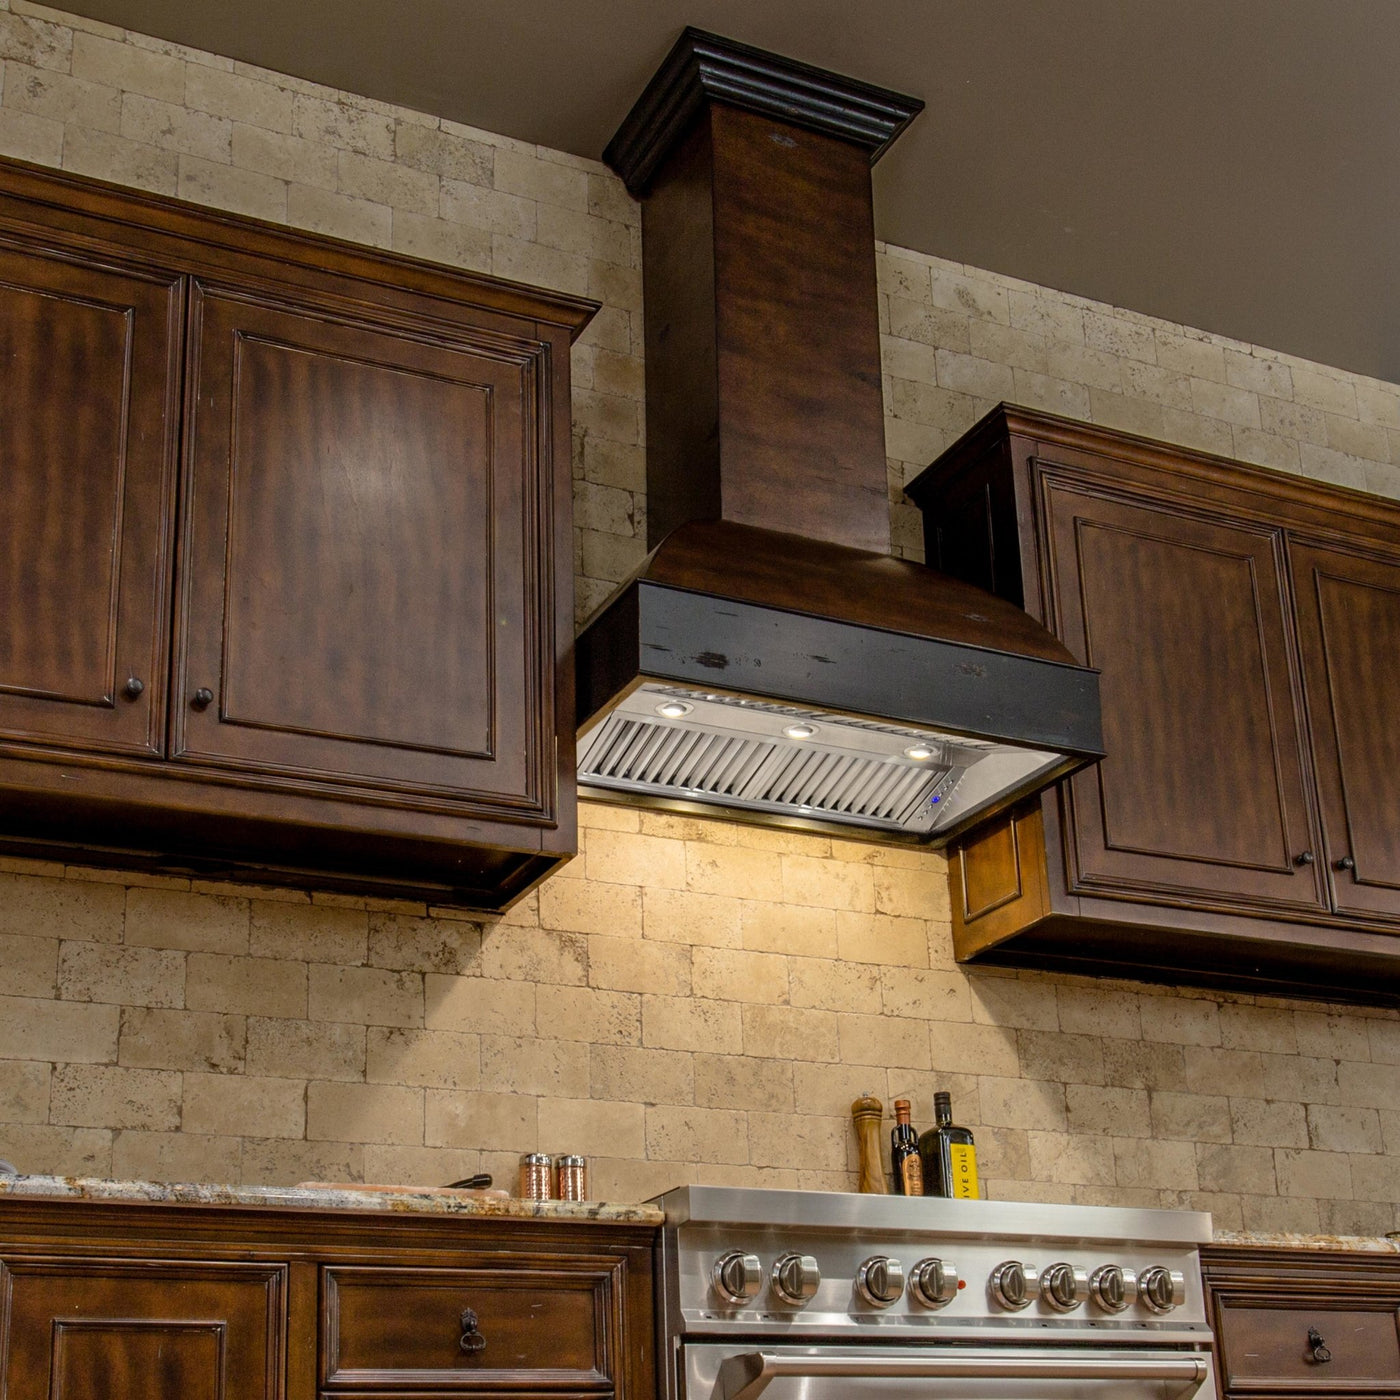 ZLINE Kitchen and Bath, ZLINE 36" Wooden Wall Mount Range Hood in Antigua and Walnut - Includes Motor (369AW-36), 369AW-36,